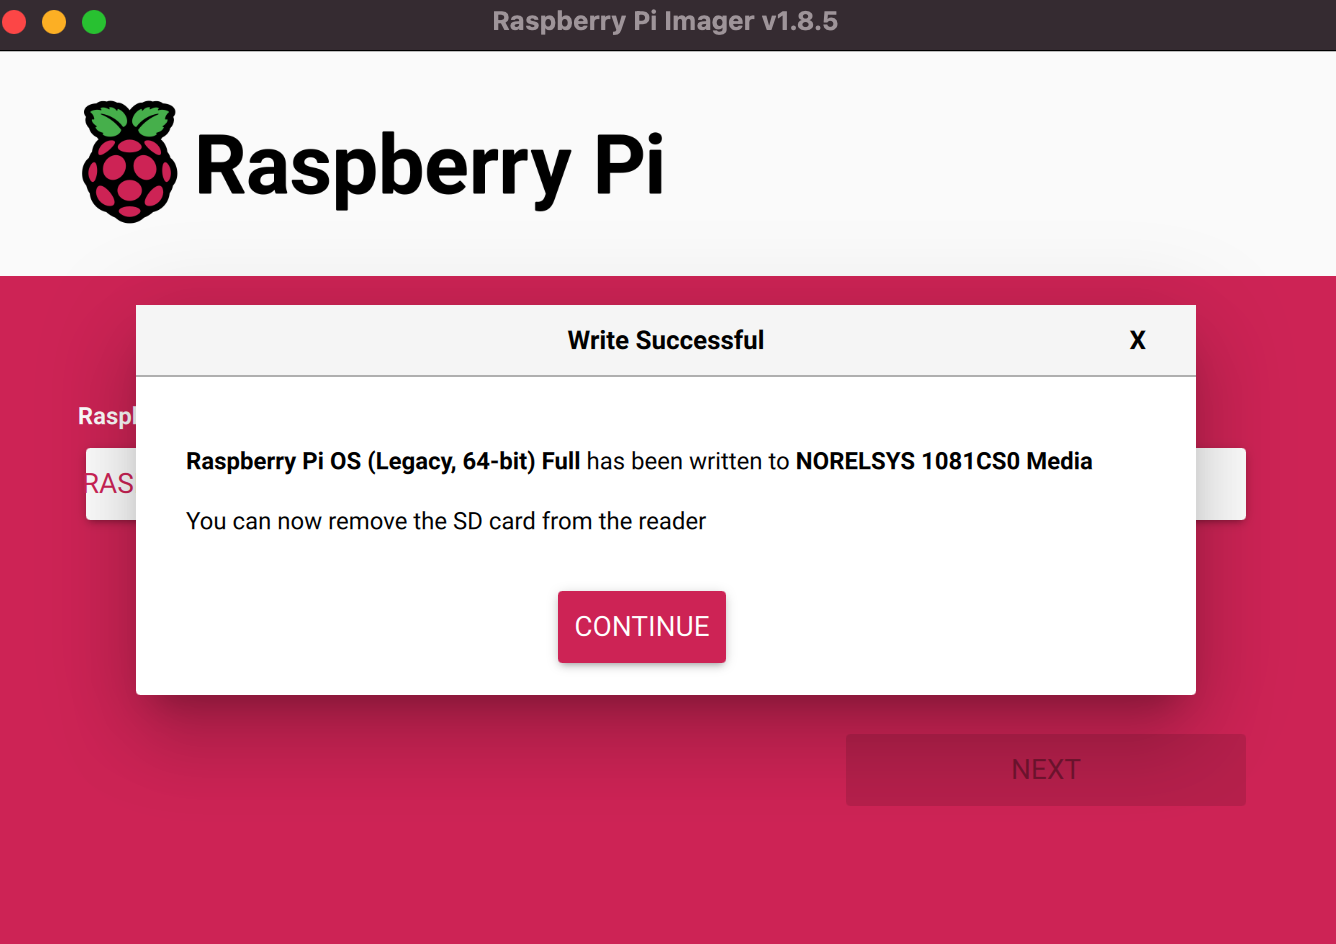 You will be notified with a dialogue box informing you that Raspberry Pi OS (Legacy, 64-bit) Full has been written successfully.